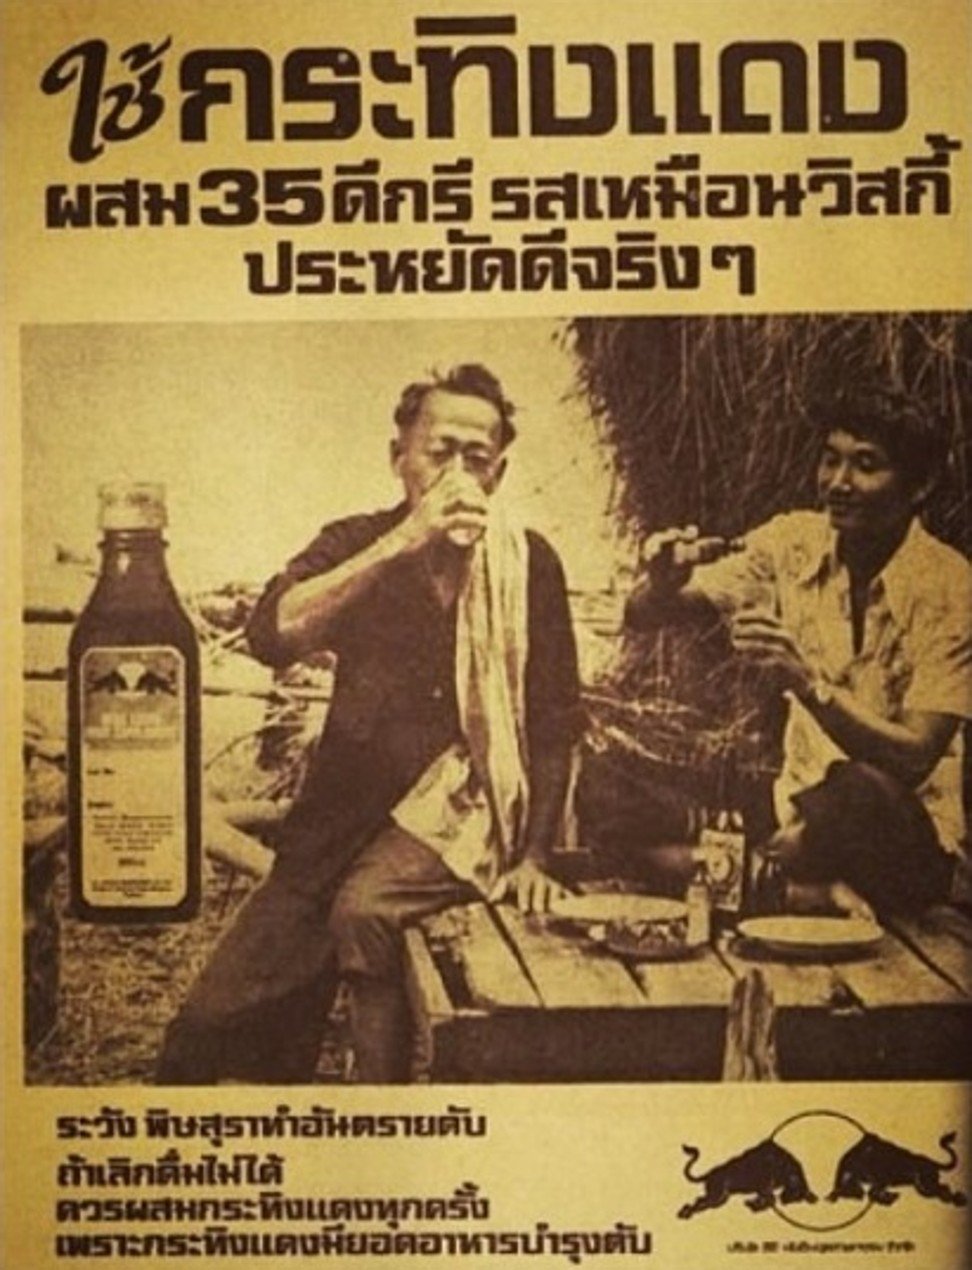 A Krating Daeng advert from 1976 showing workers consuming the drink.